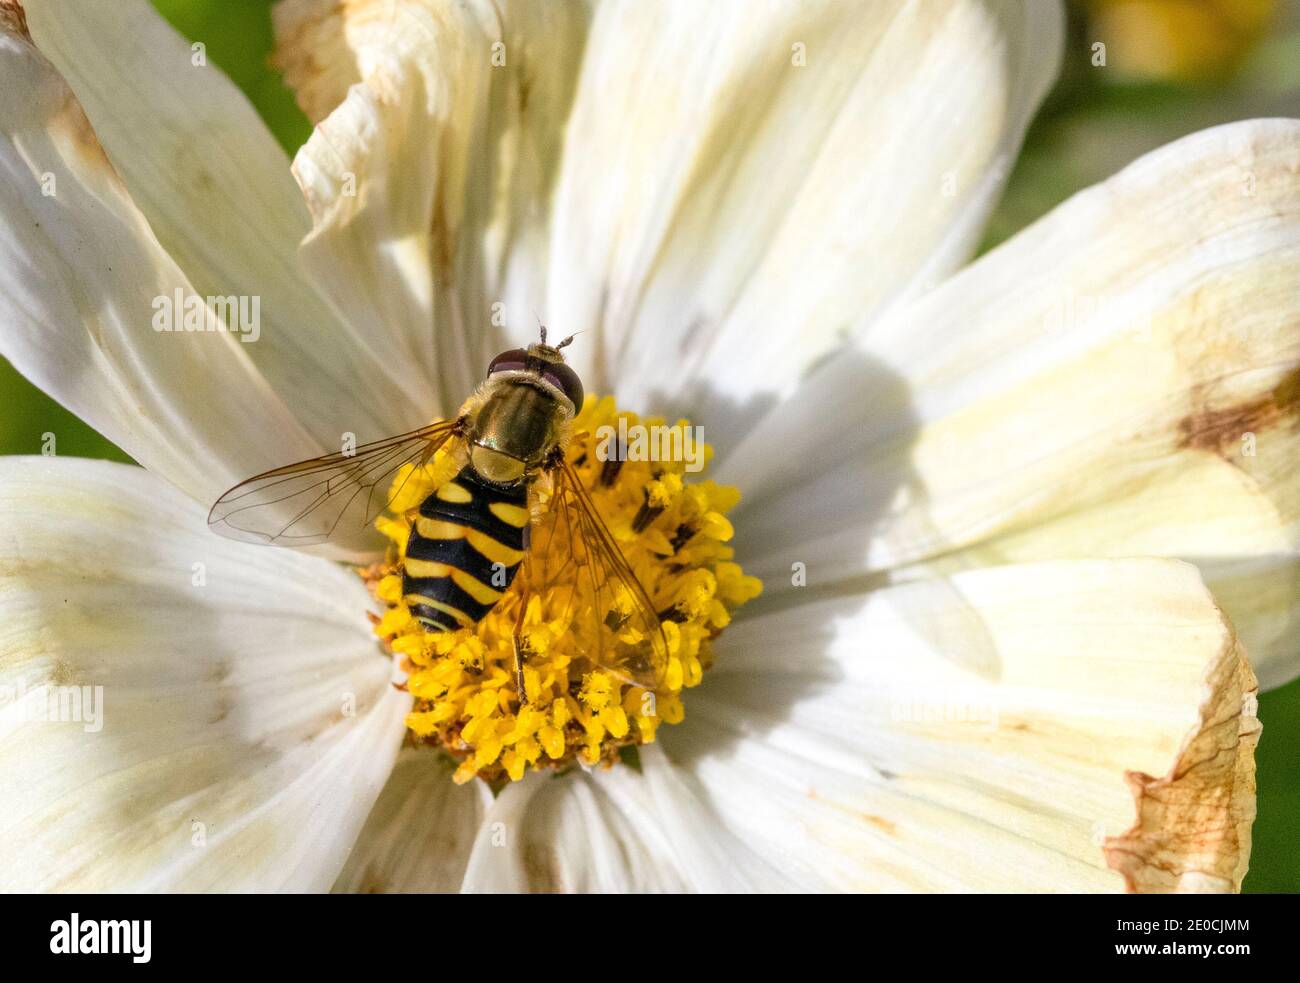 Syrphus Sp. hoverfly on Cosmos flower Stock Photo